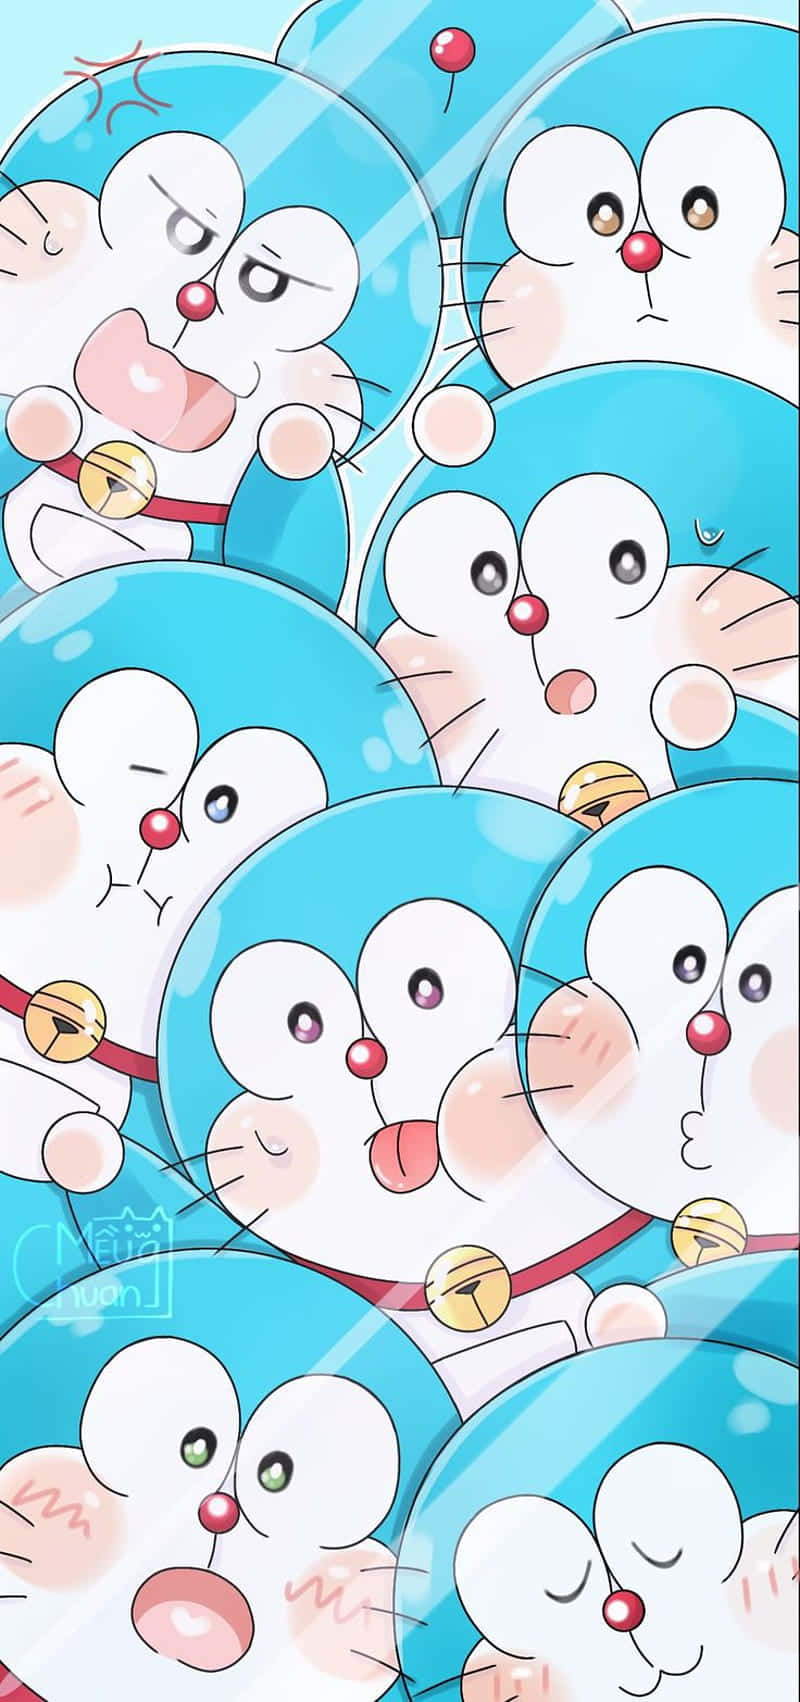 Doraemon - A Group Of Blue And White Cartoon Characters Background